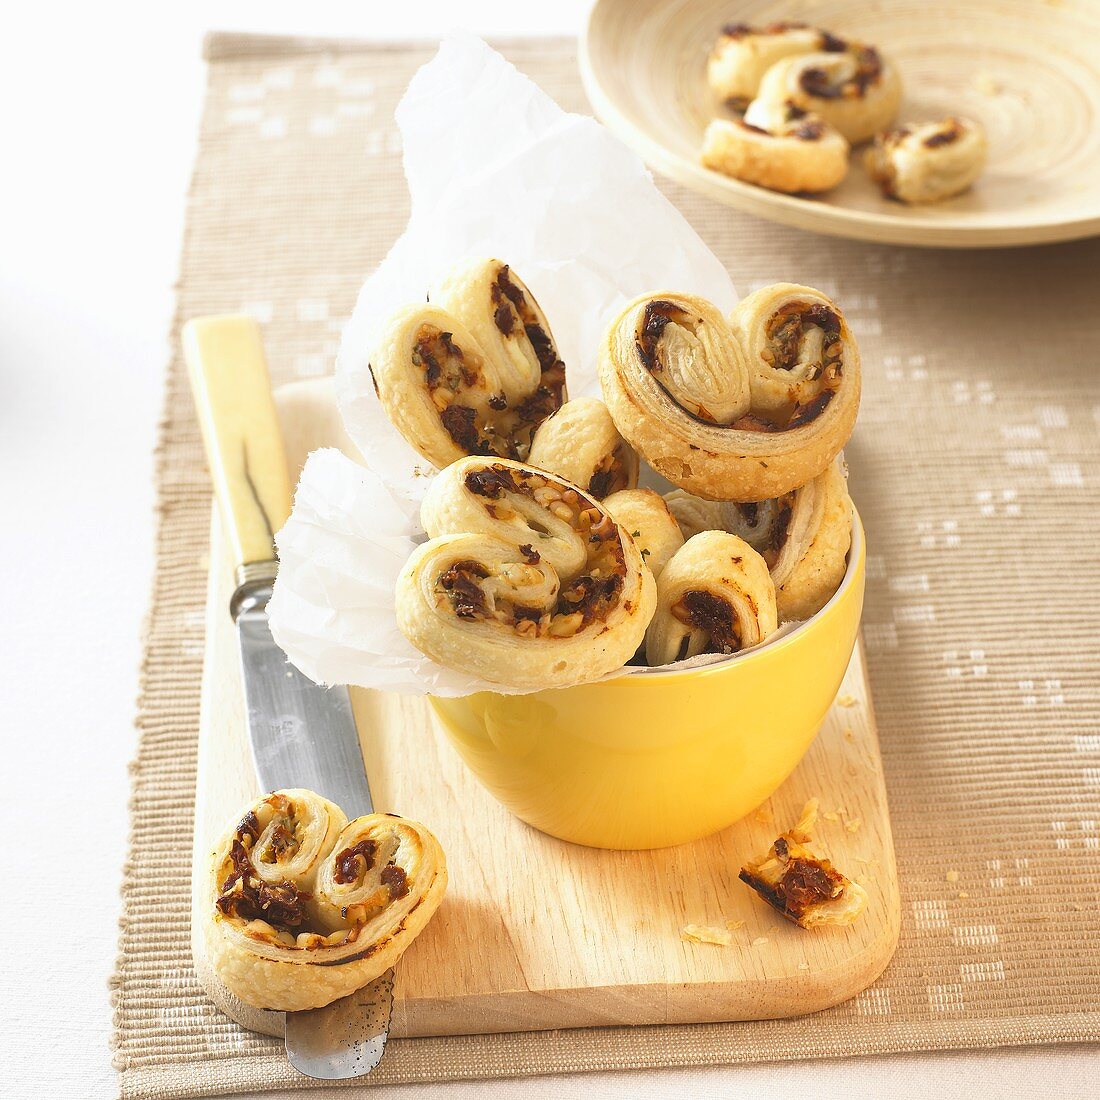 Palmiers with nut filling